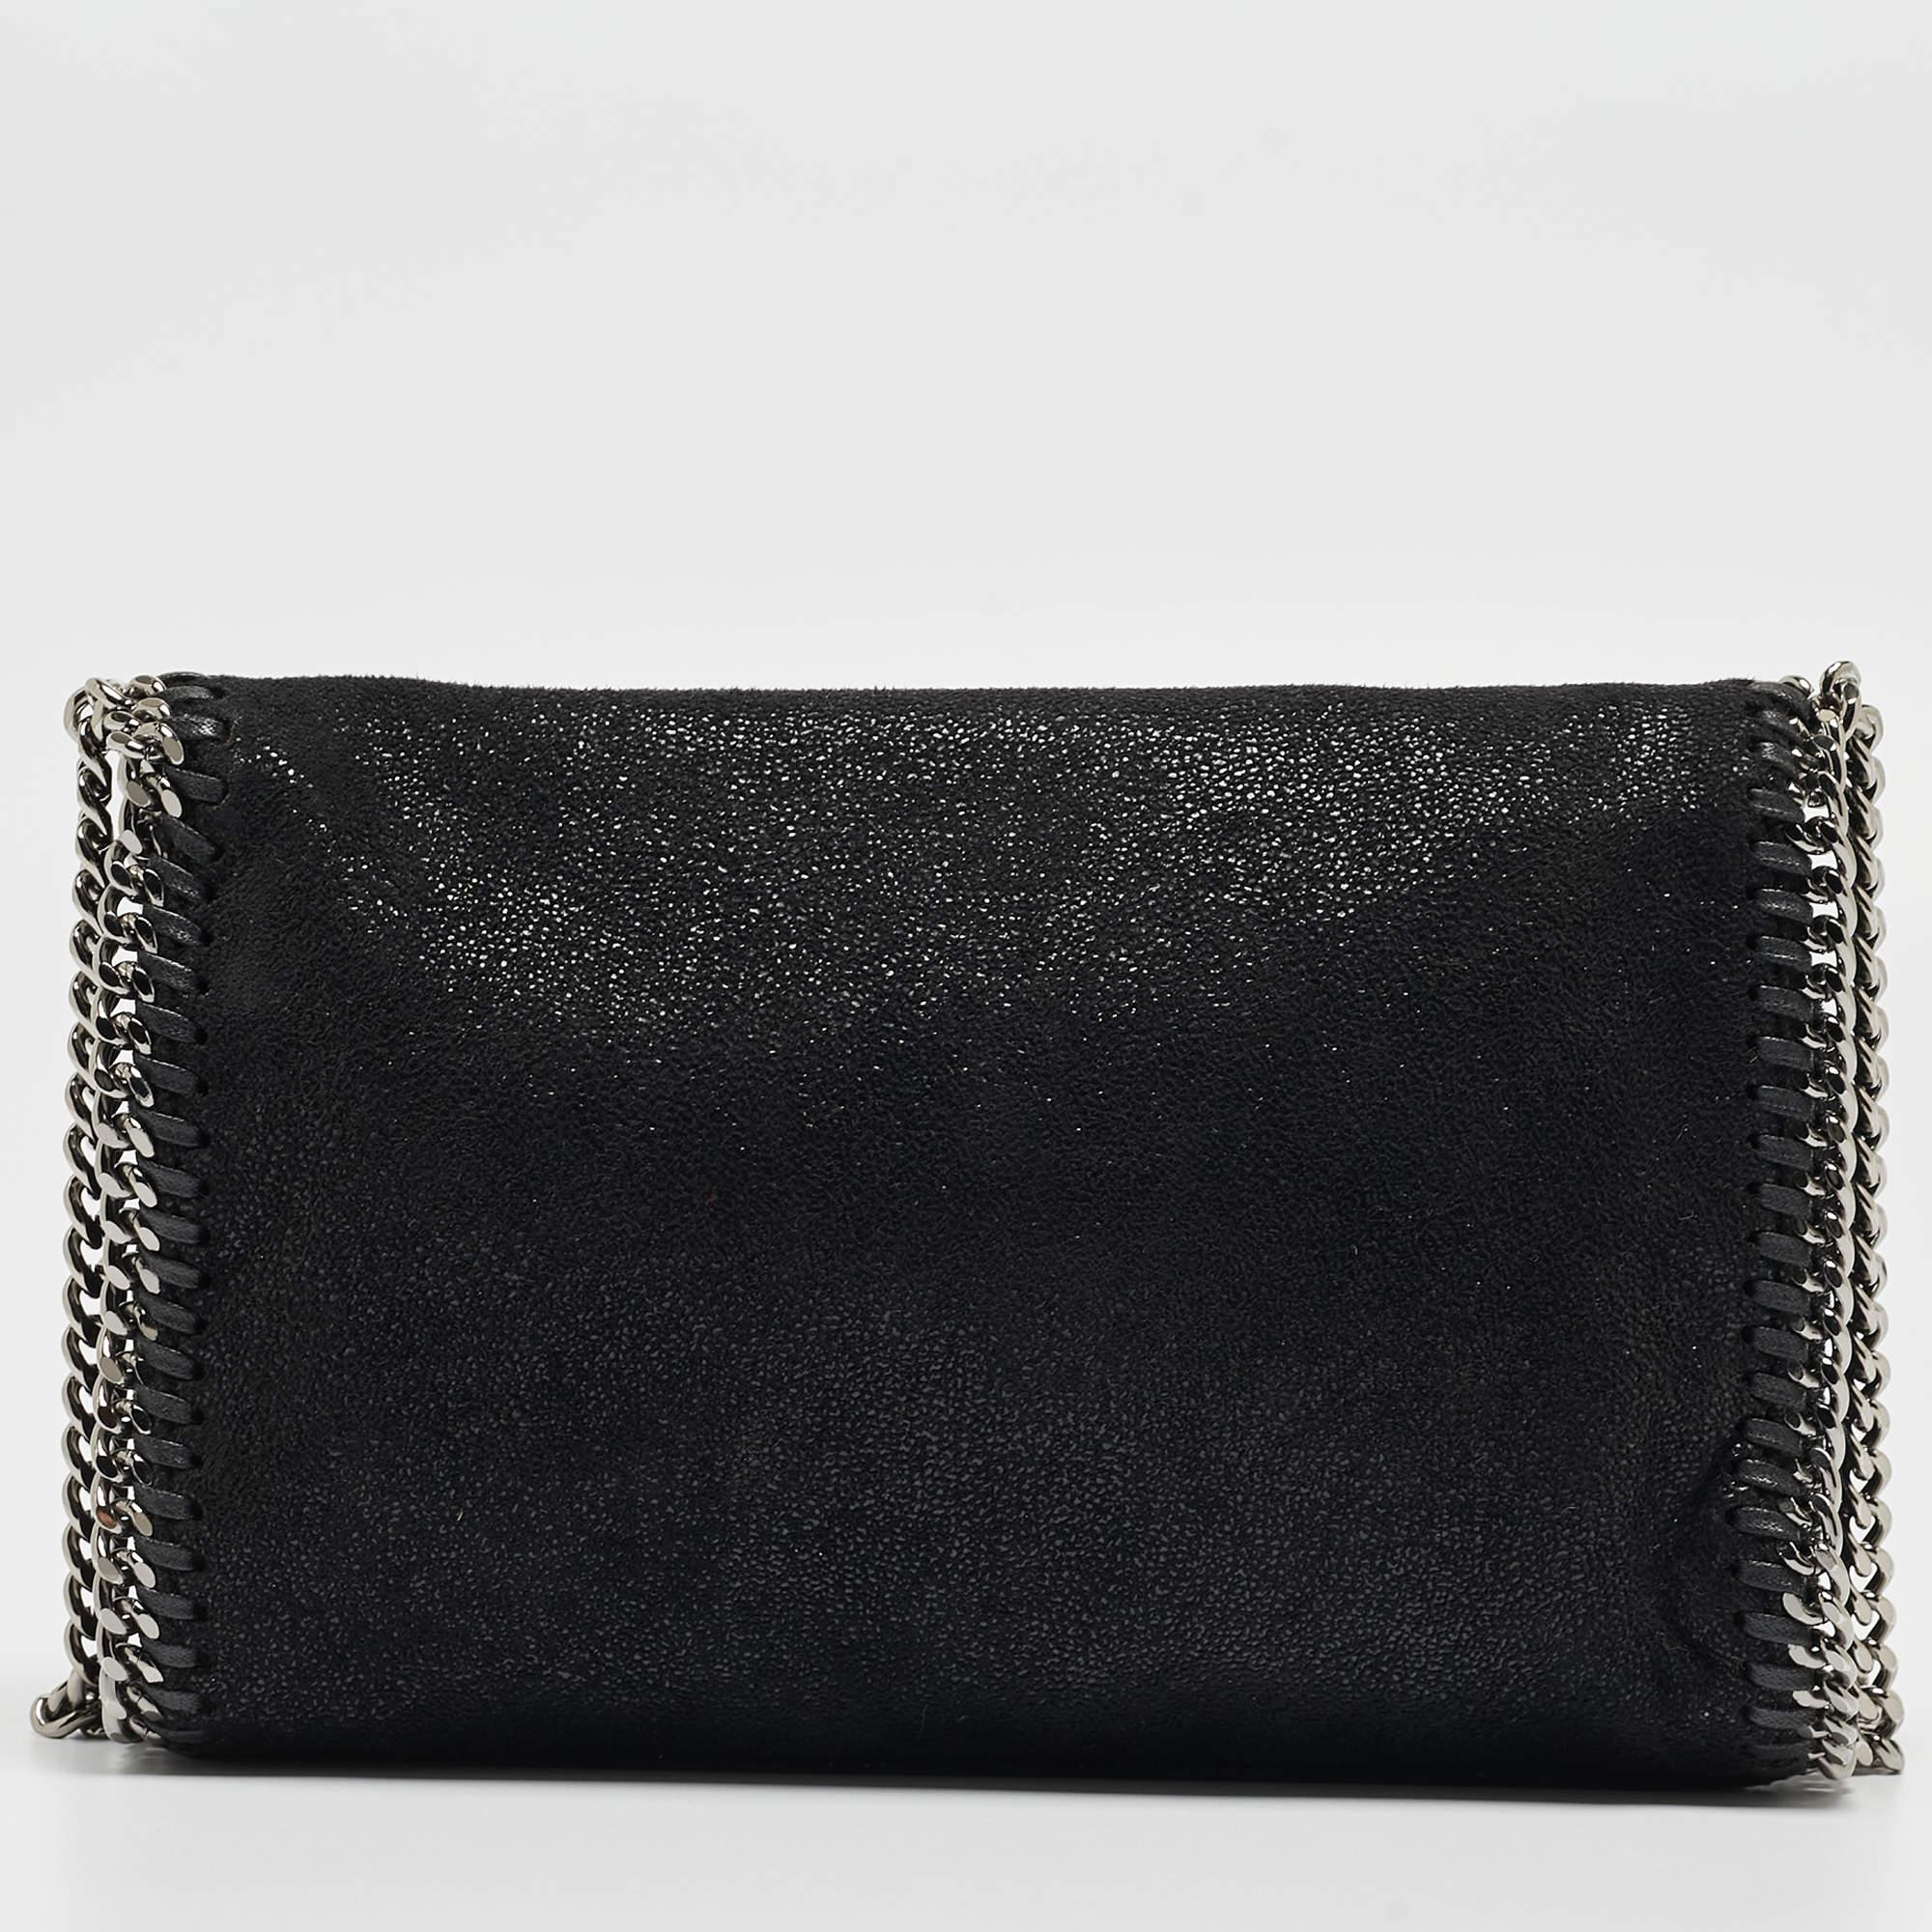 The chain whipstitch detailing beautifully outlines this Stella McCartney Falabella bag. Crafted from faux leather, it has been adorned with silver-tone accents, and it can be carried with a chain strap. The fabric-lined interior can safely store